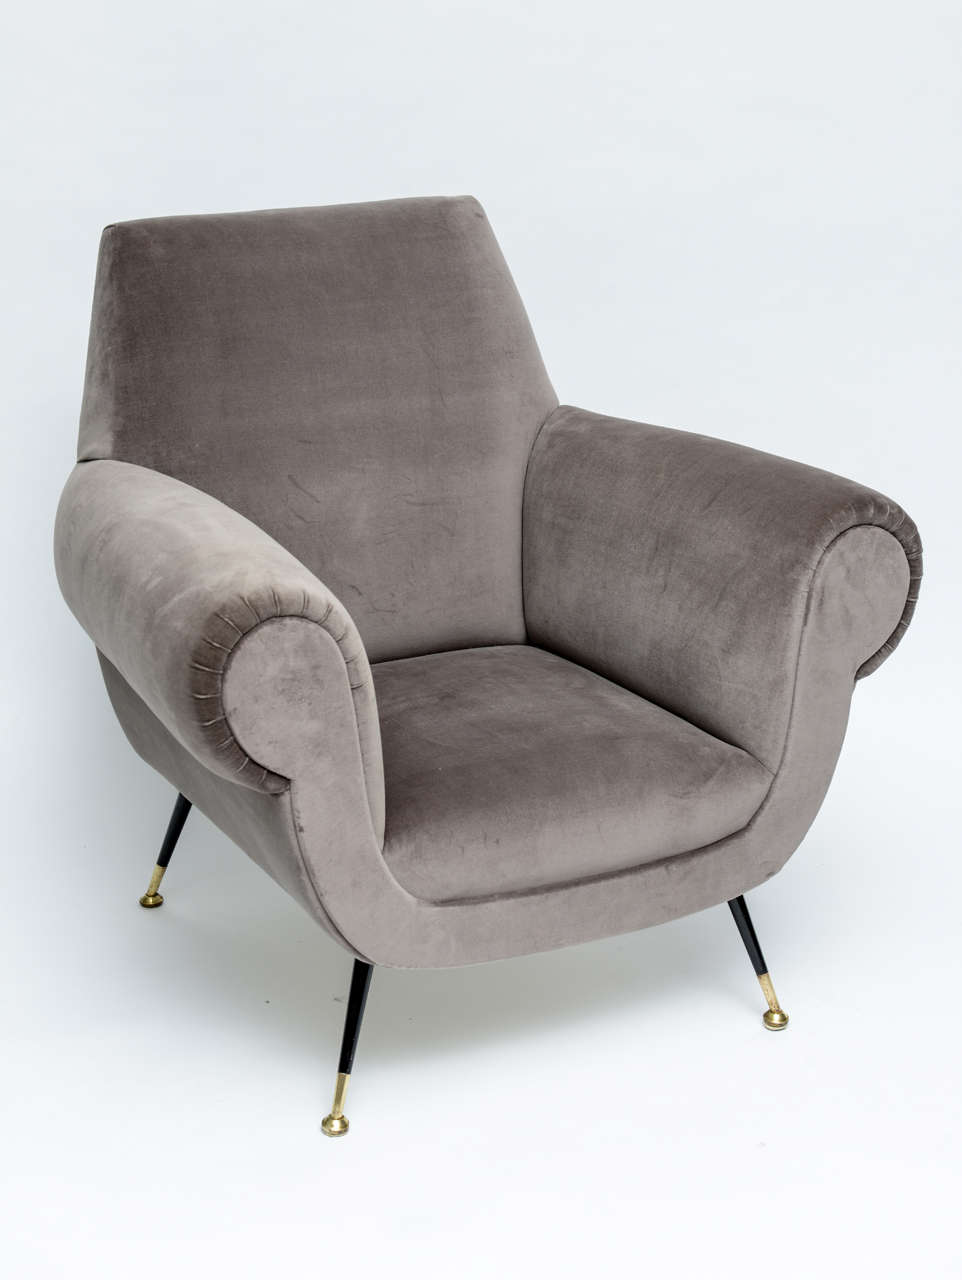 Let the deep seat and high arms of these handsome Italian lounge chairs envelop you in Continental comfort. Sexy and brooding in elephant-grey velvet upholstery, these masculine dandies - with their gloss-black enameled legs and polished brass